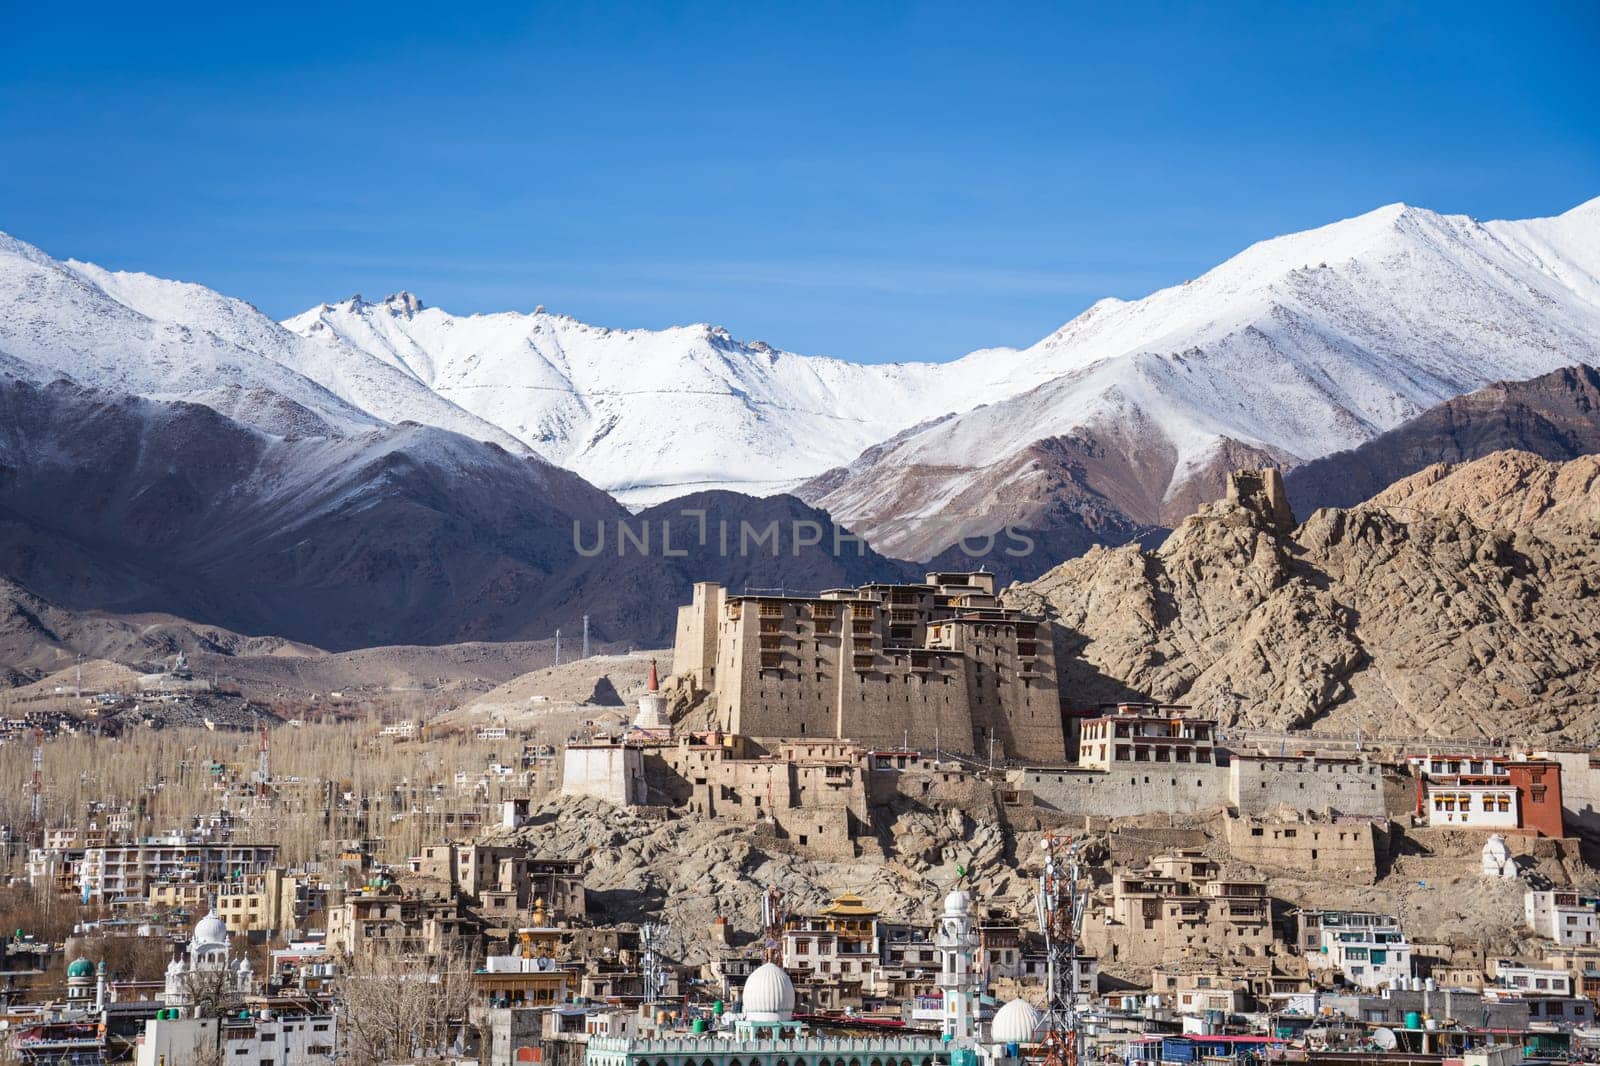 Leh, India - April 02, 2023: View the city with Leh Palace and with snow capped mountains in the background